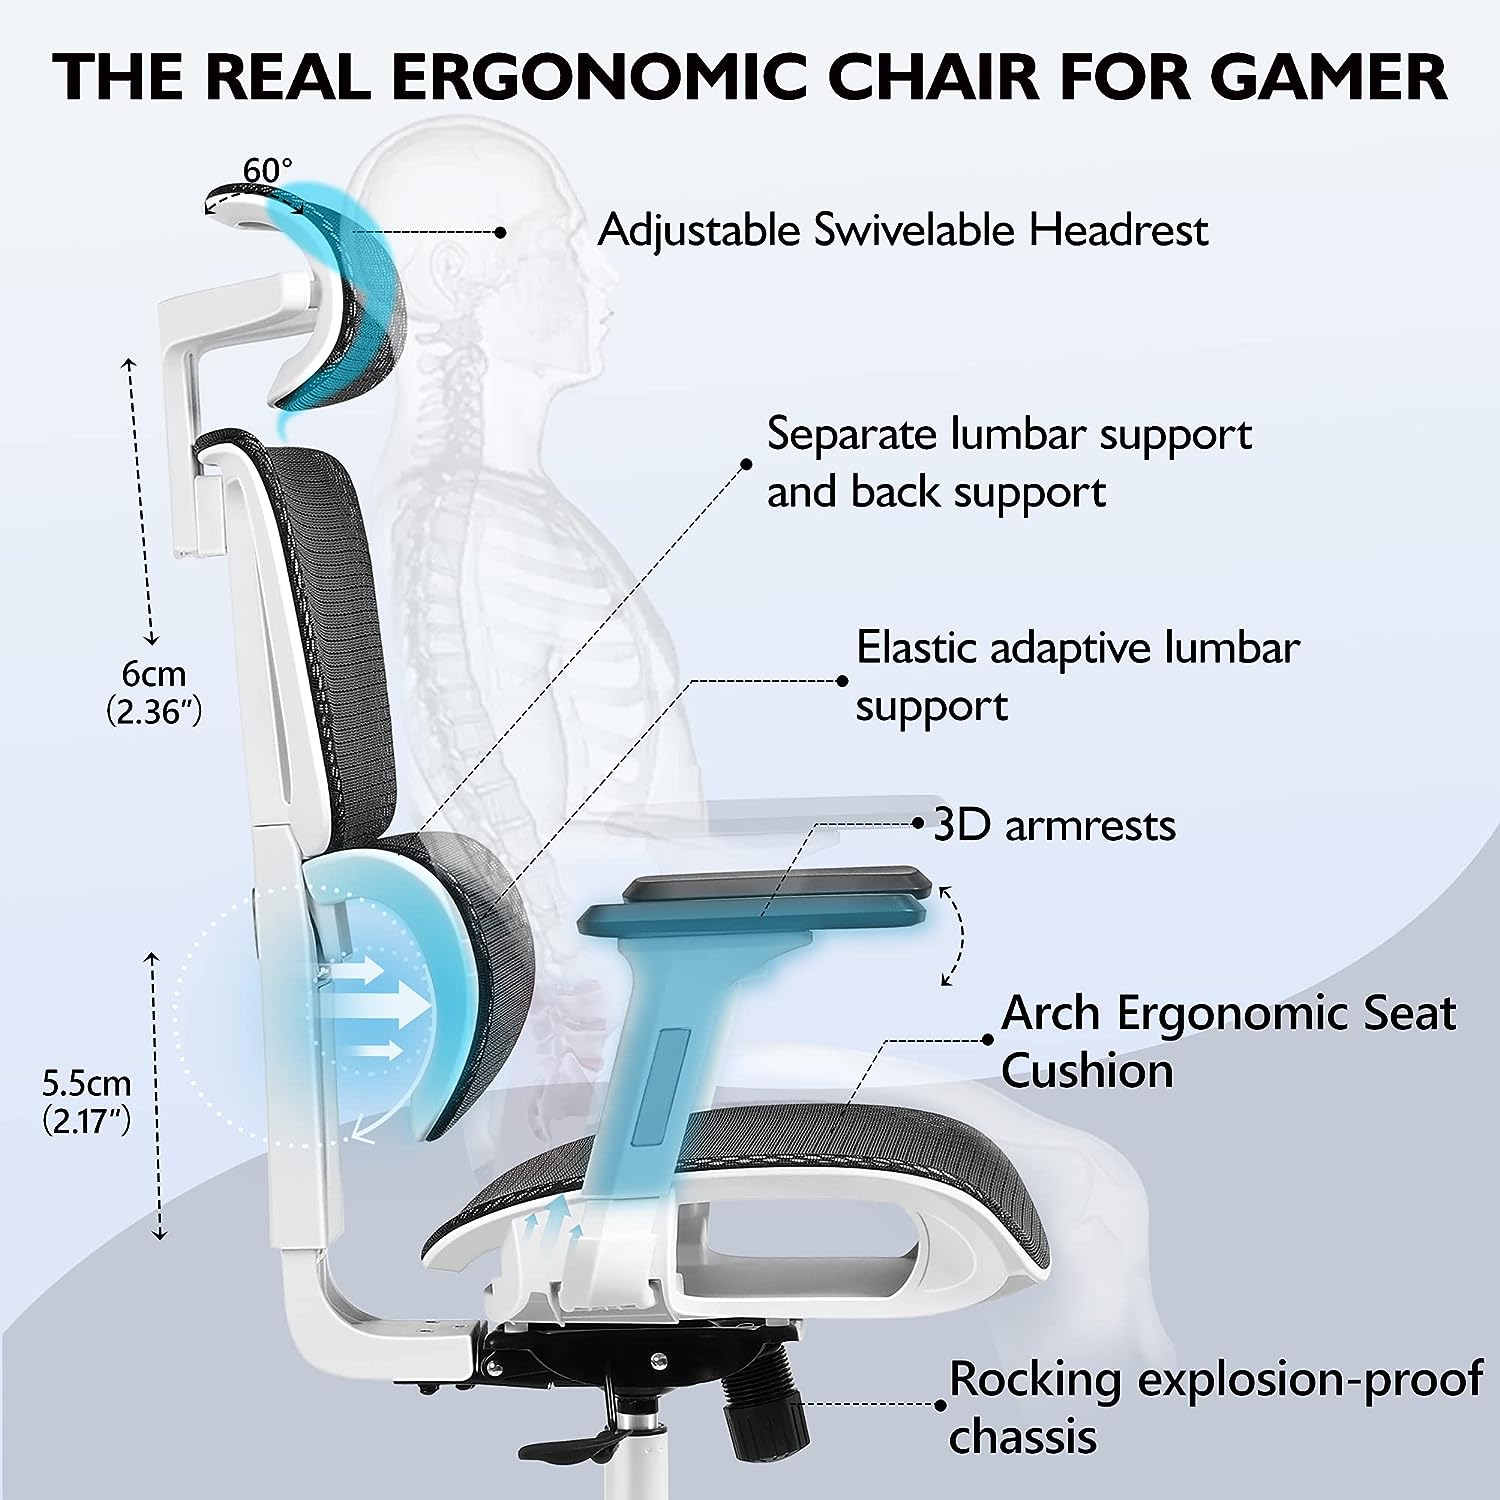 Primy gaming chair
